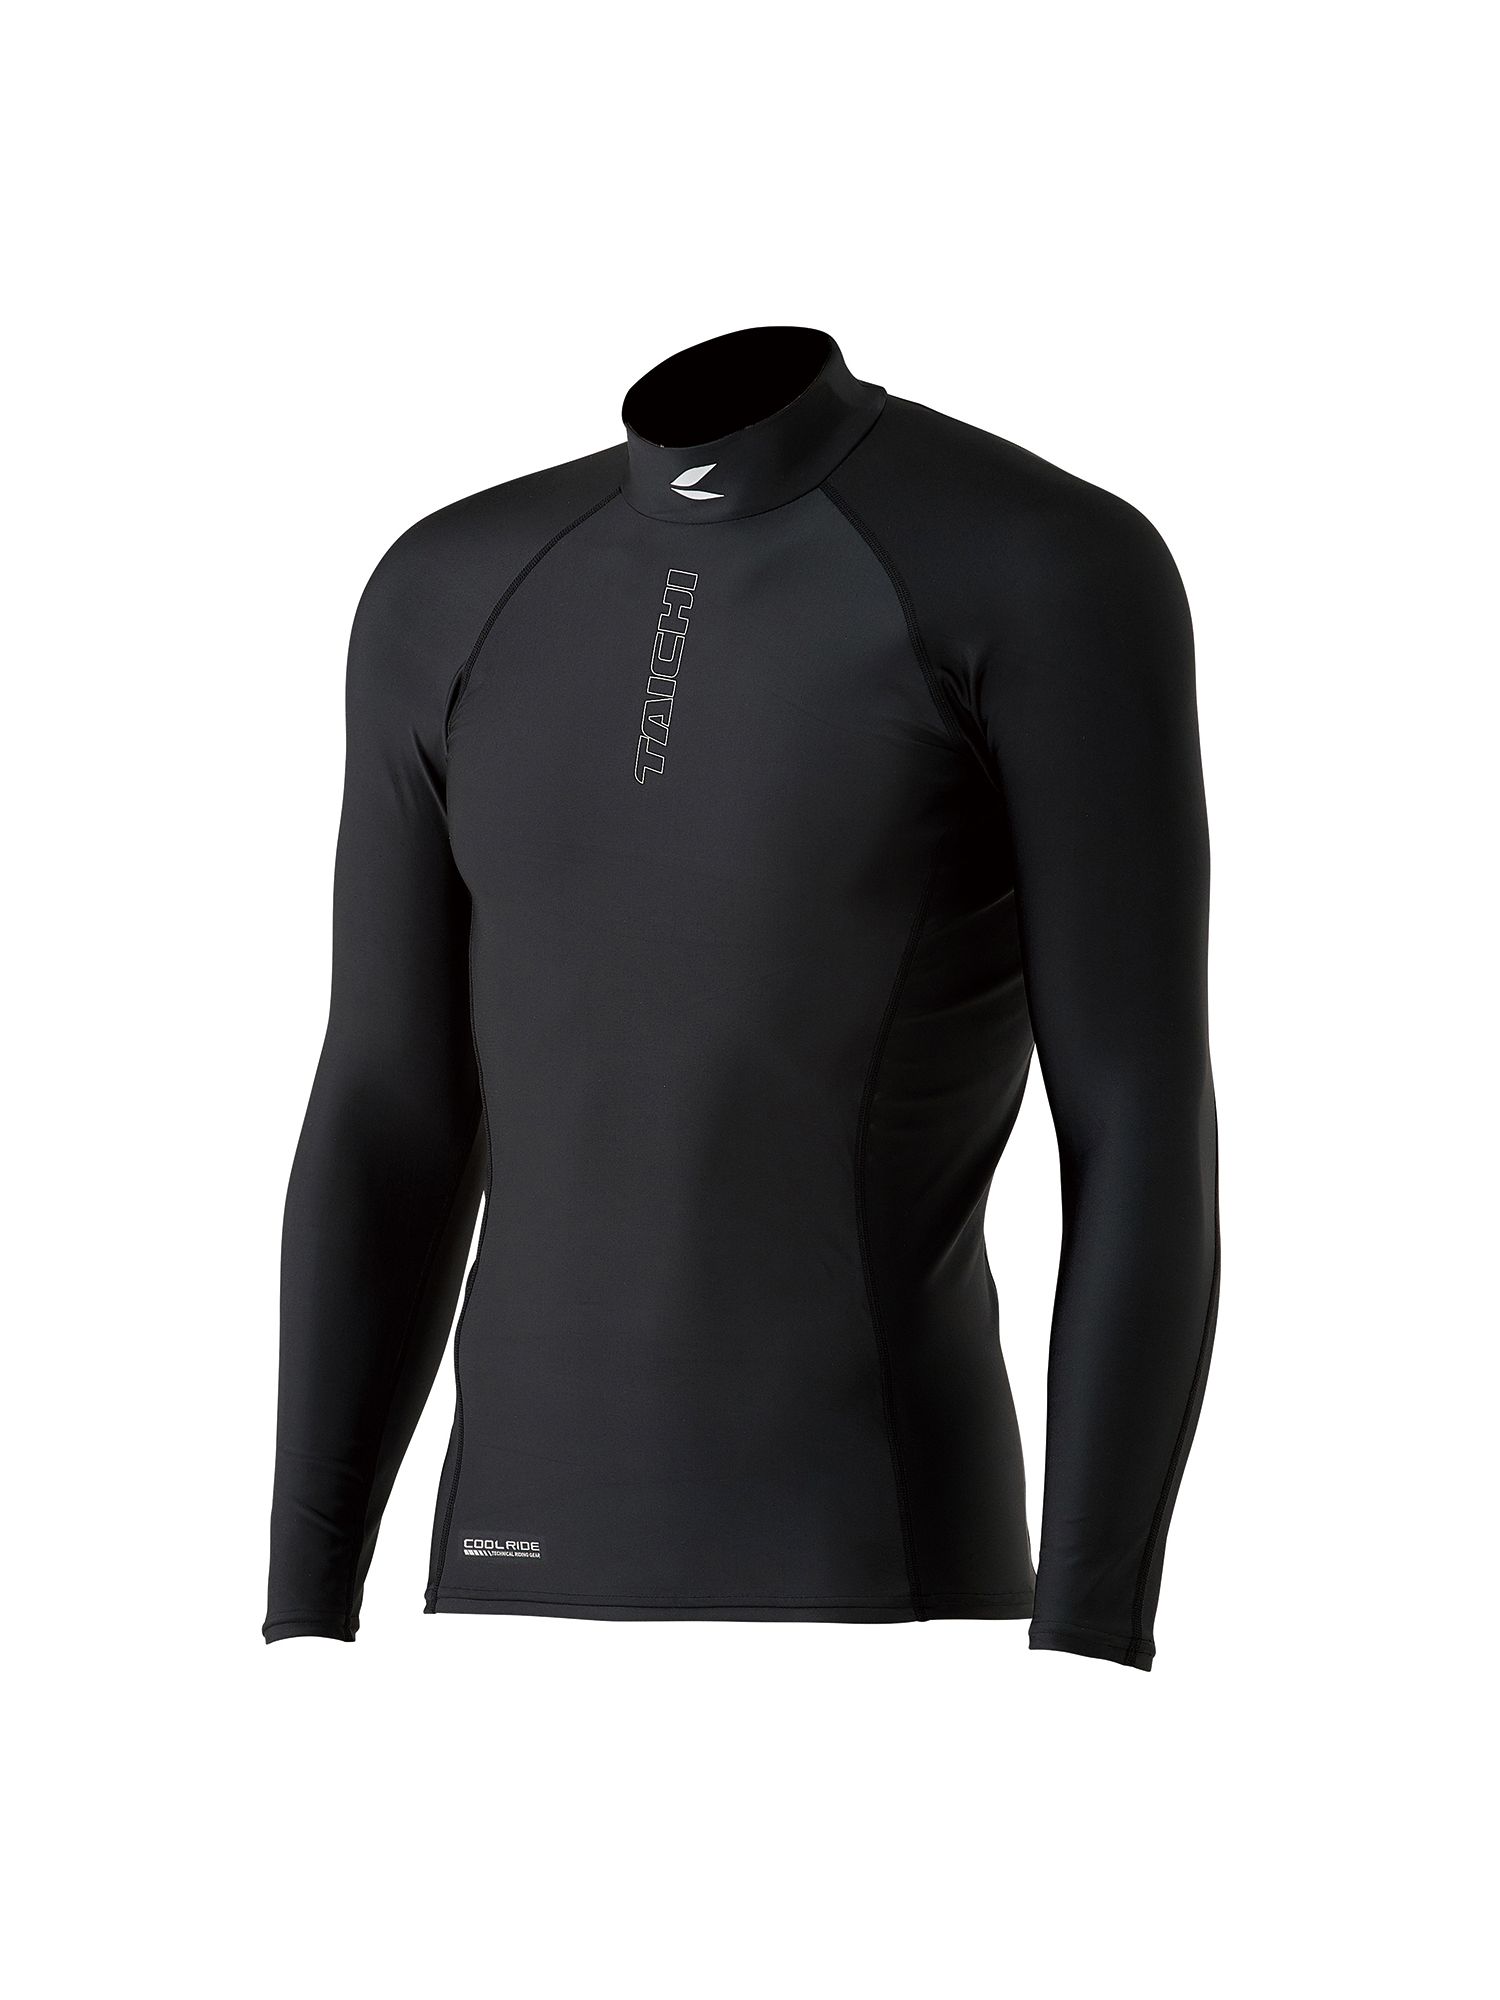 RSU320 | COOL RIDE SPORTS UNDER SHIRT［1color］